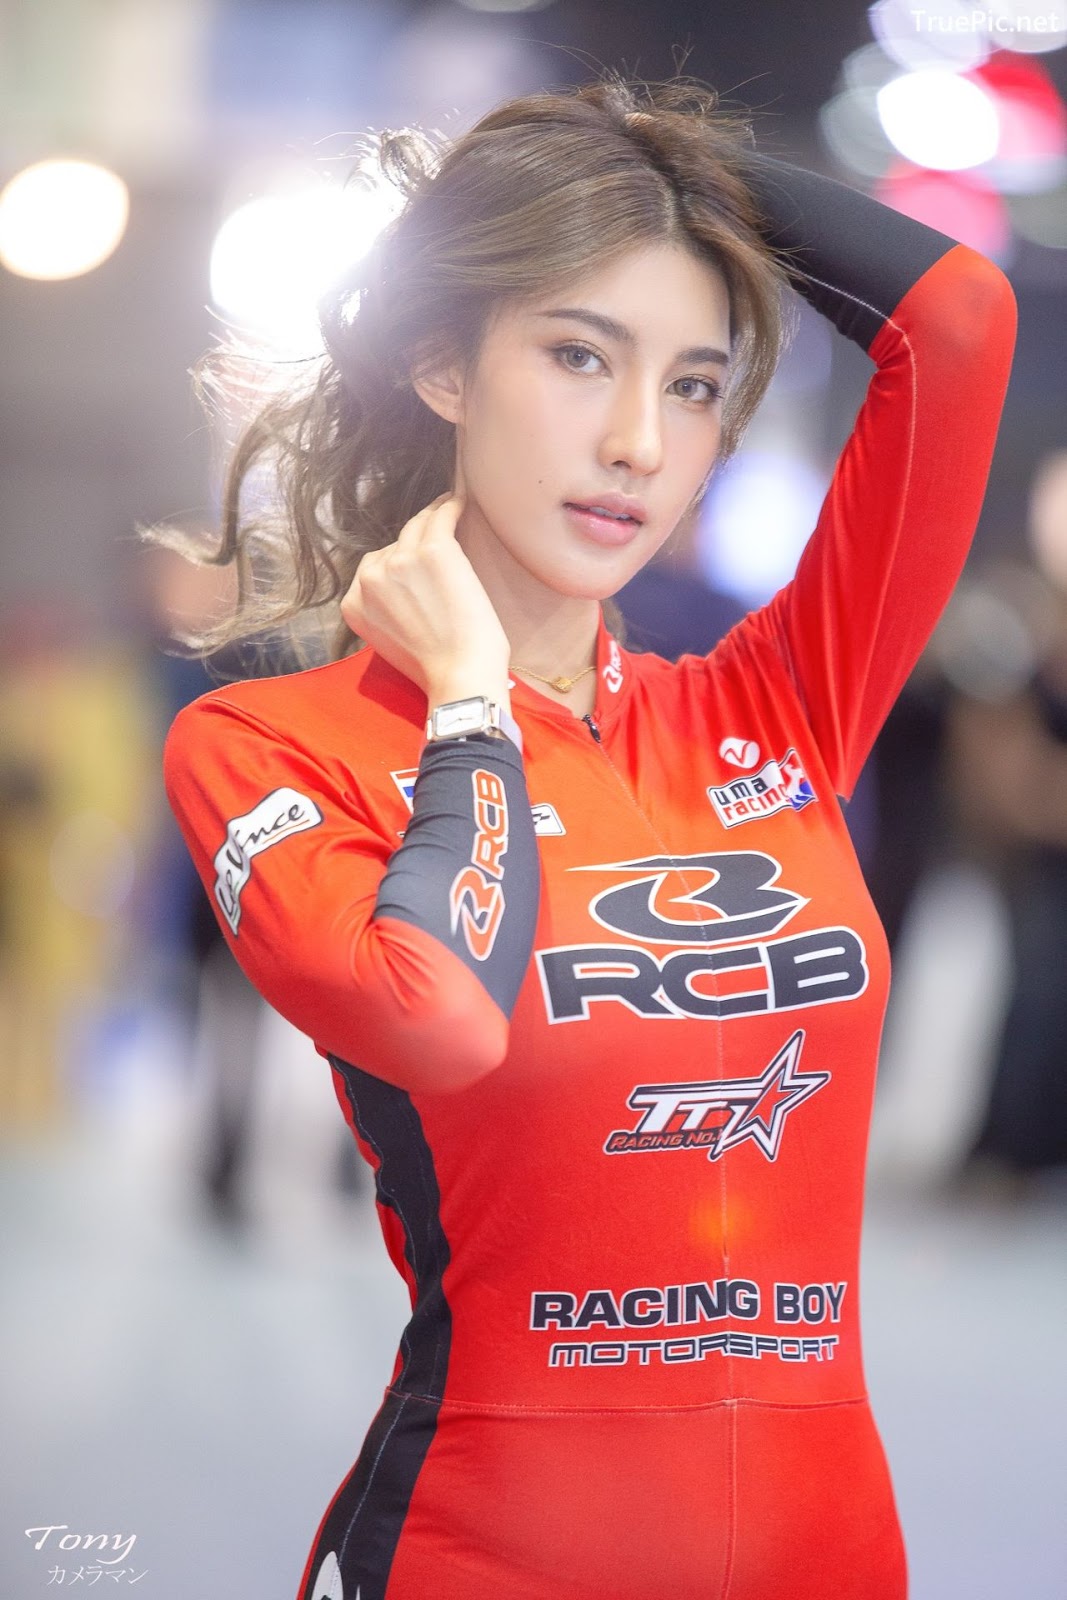 Image-Thailand-Hot-Model-Thai-Racing-Girl-At-Motor-Expo-2019-TruePic.net- Picture-40